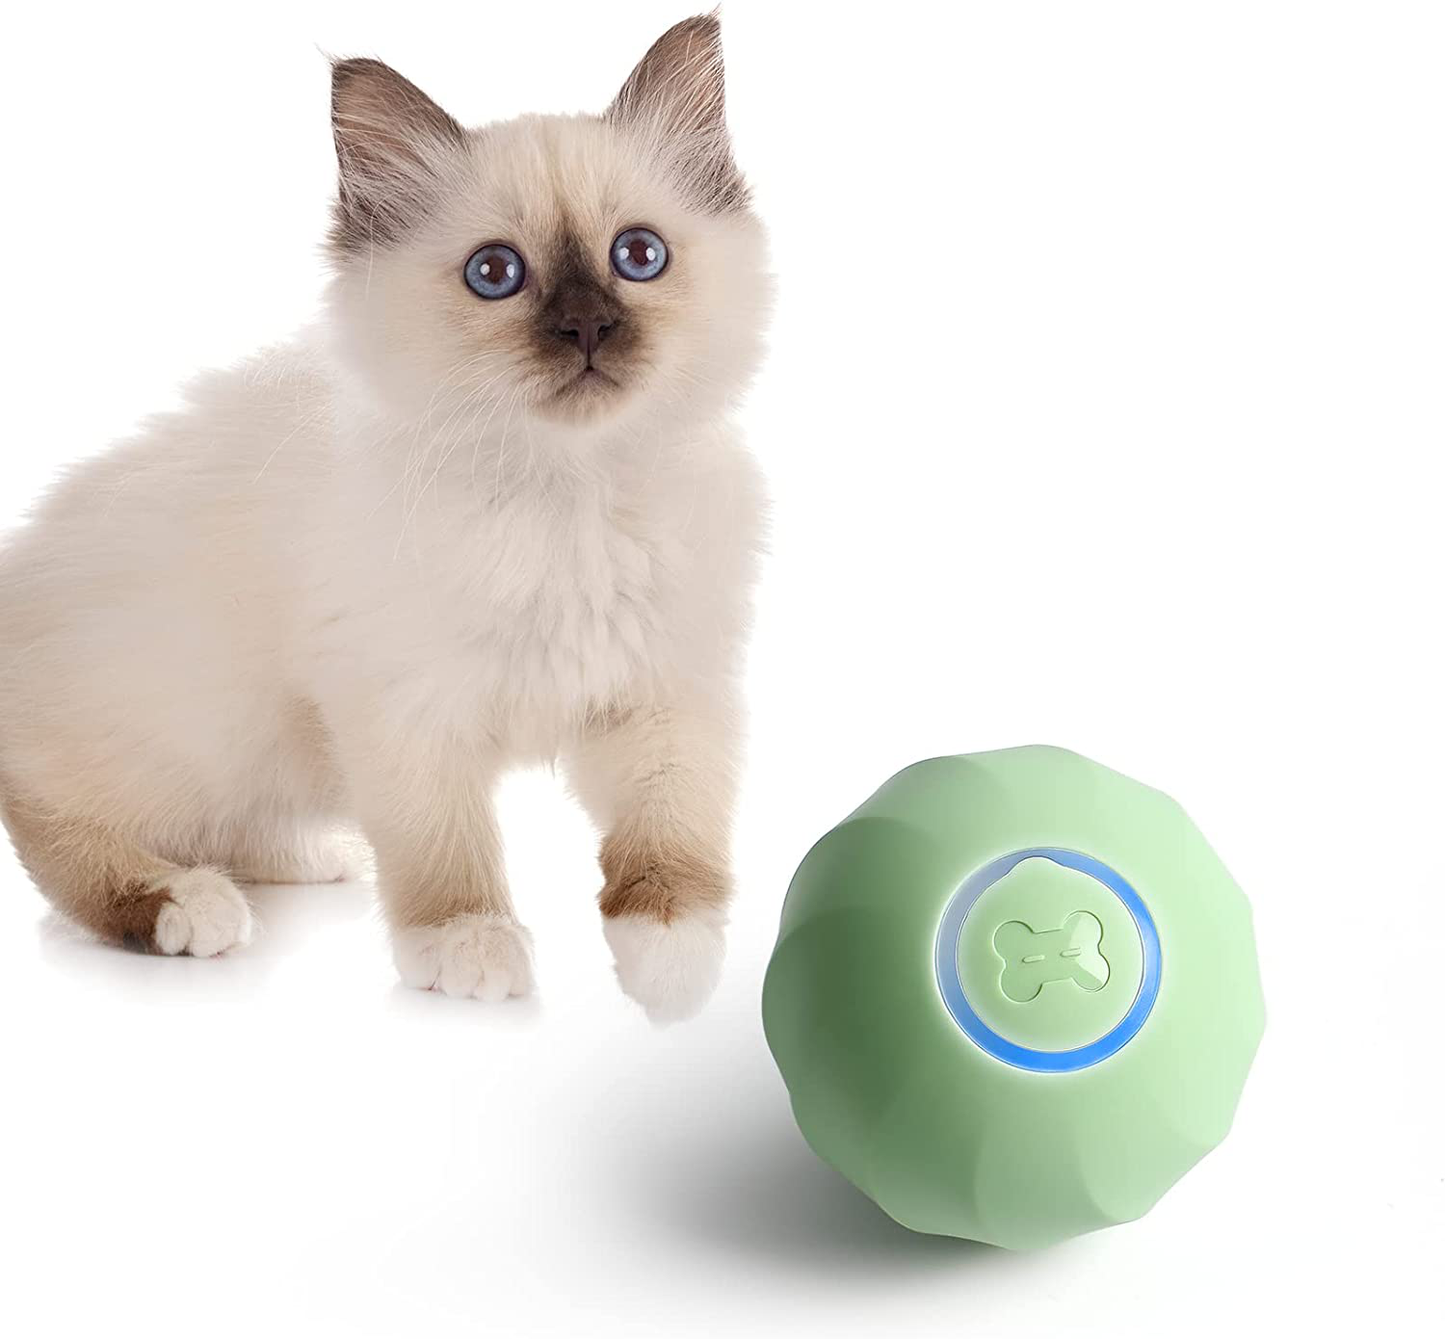 Boqii Cat Toys for Indoor Cats Smart Balls, [3 Modes for Cats' Different Personalities] [Upgrade Plush Material] Interactive Cat Toys Balls, USB Charging Cat Stuff, Automatic Cat Toy as Cat Gifts Animals & Pet Supplies > Pet Supplies > Cat Supplies > Cat Toys boqii Matcha Green  